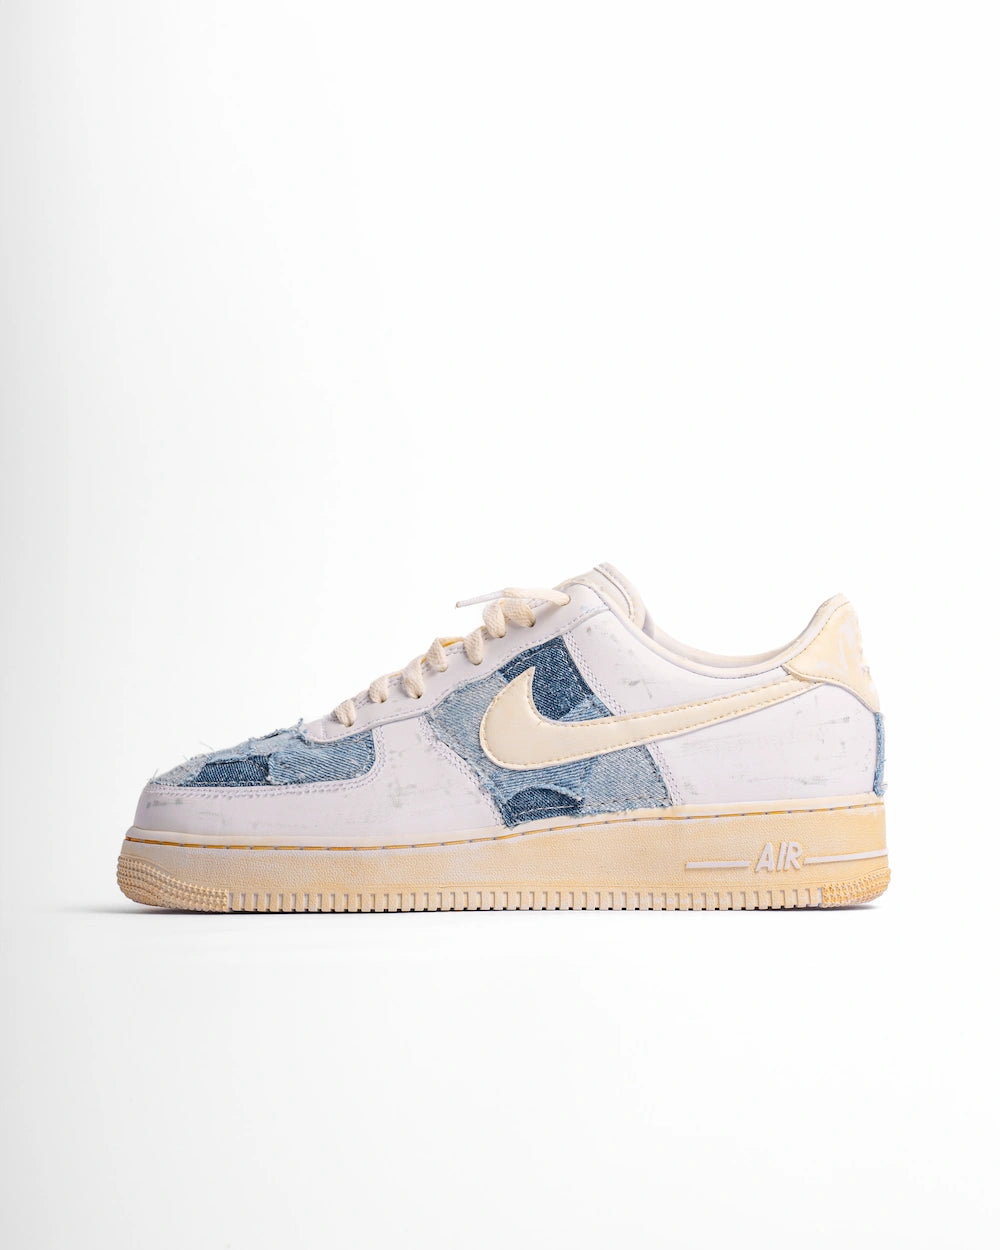 Nike Air Force 1 custom con jeans patchwork e base beige effetto vintage